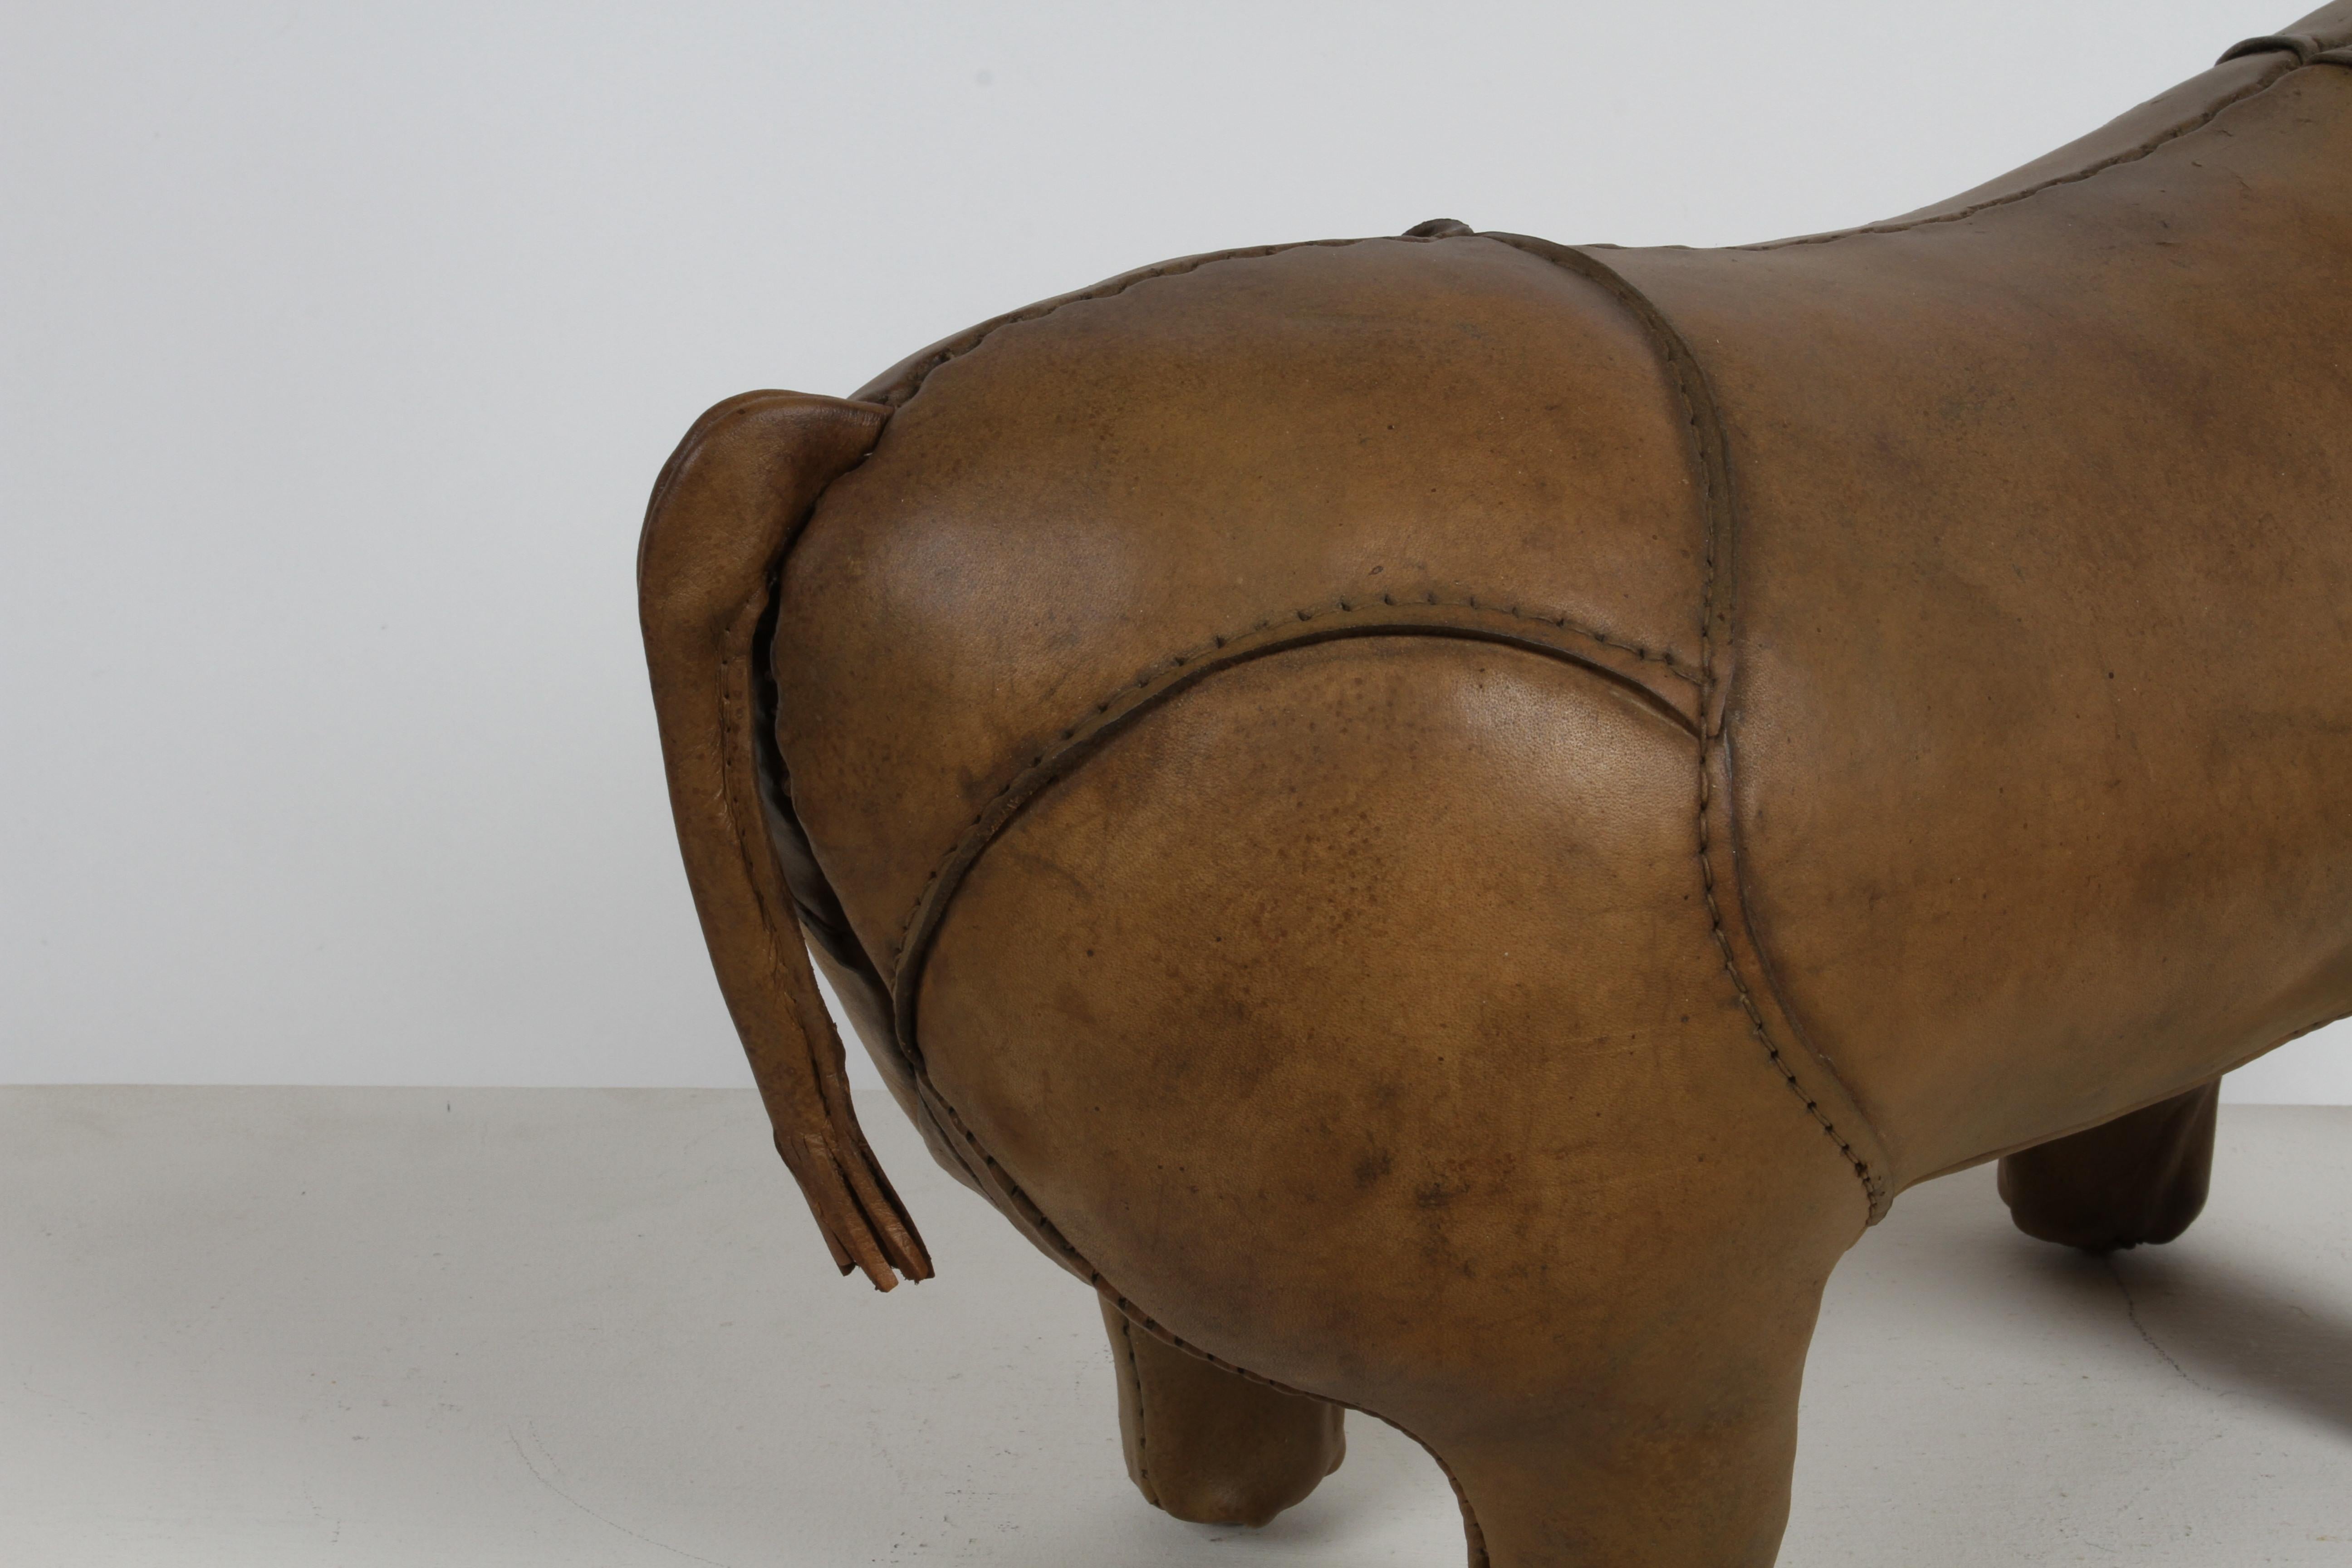 1960s Dimitri Omersa Leather Rhino Retailed by Abercrombie & Fitch - Restored For Sale 4